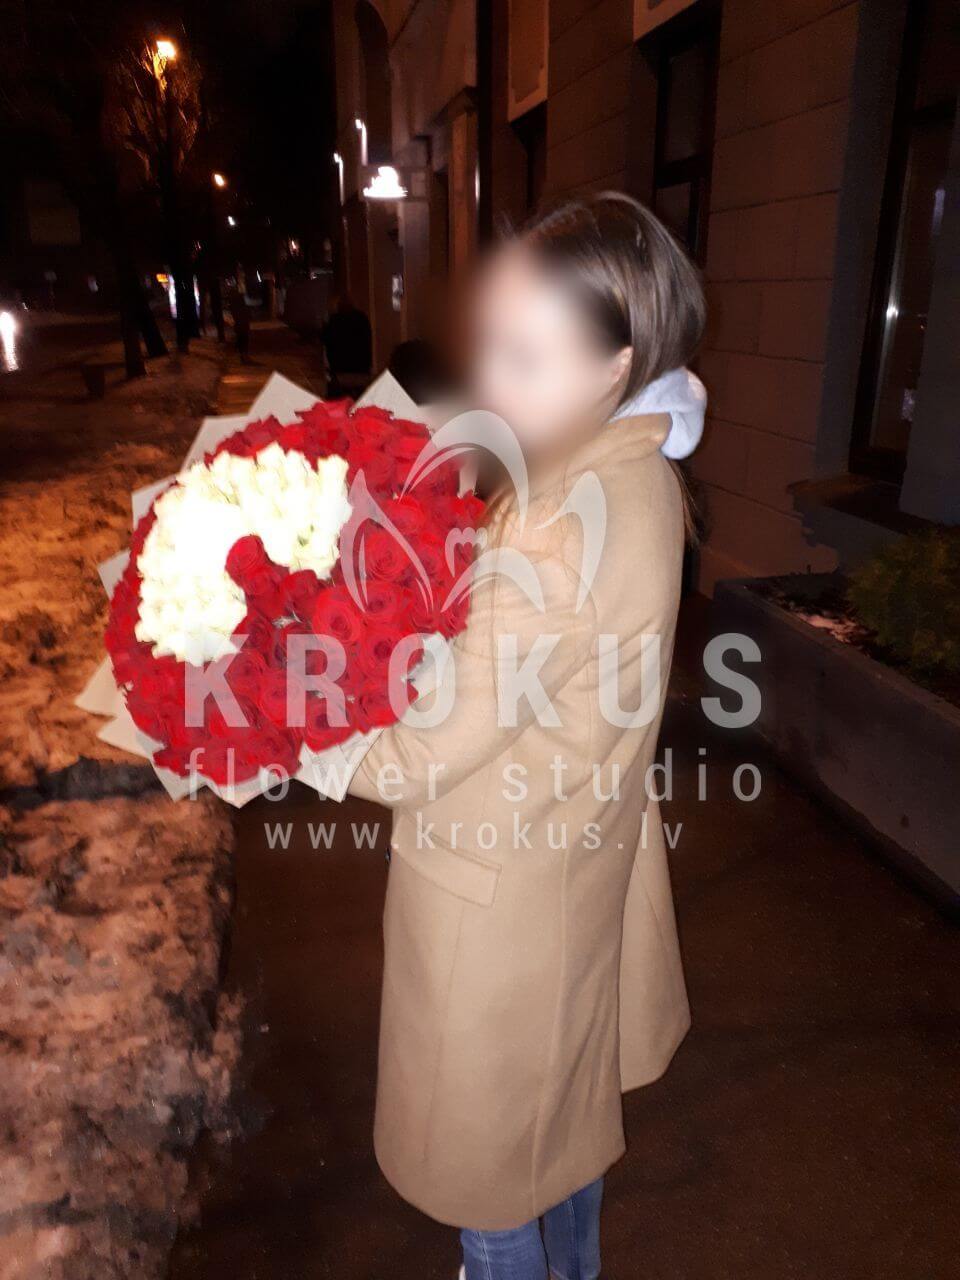 Deliver flowers to Latvia (white rosesred roses)